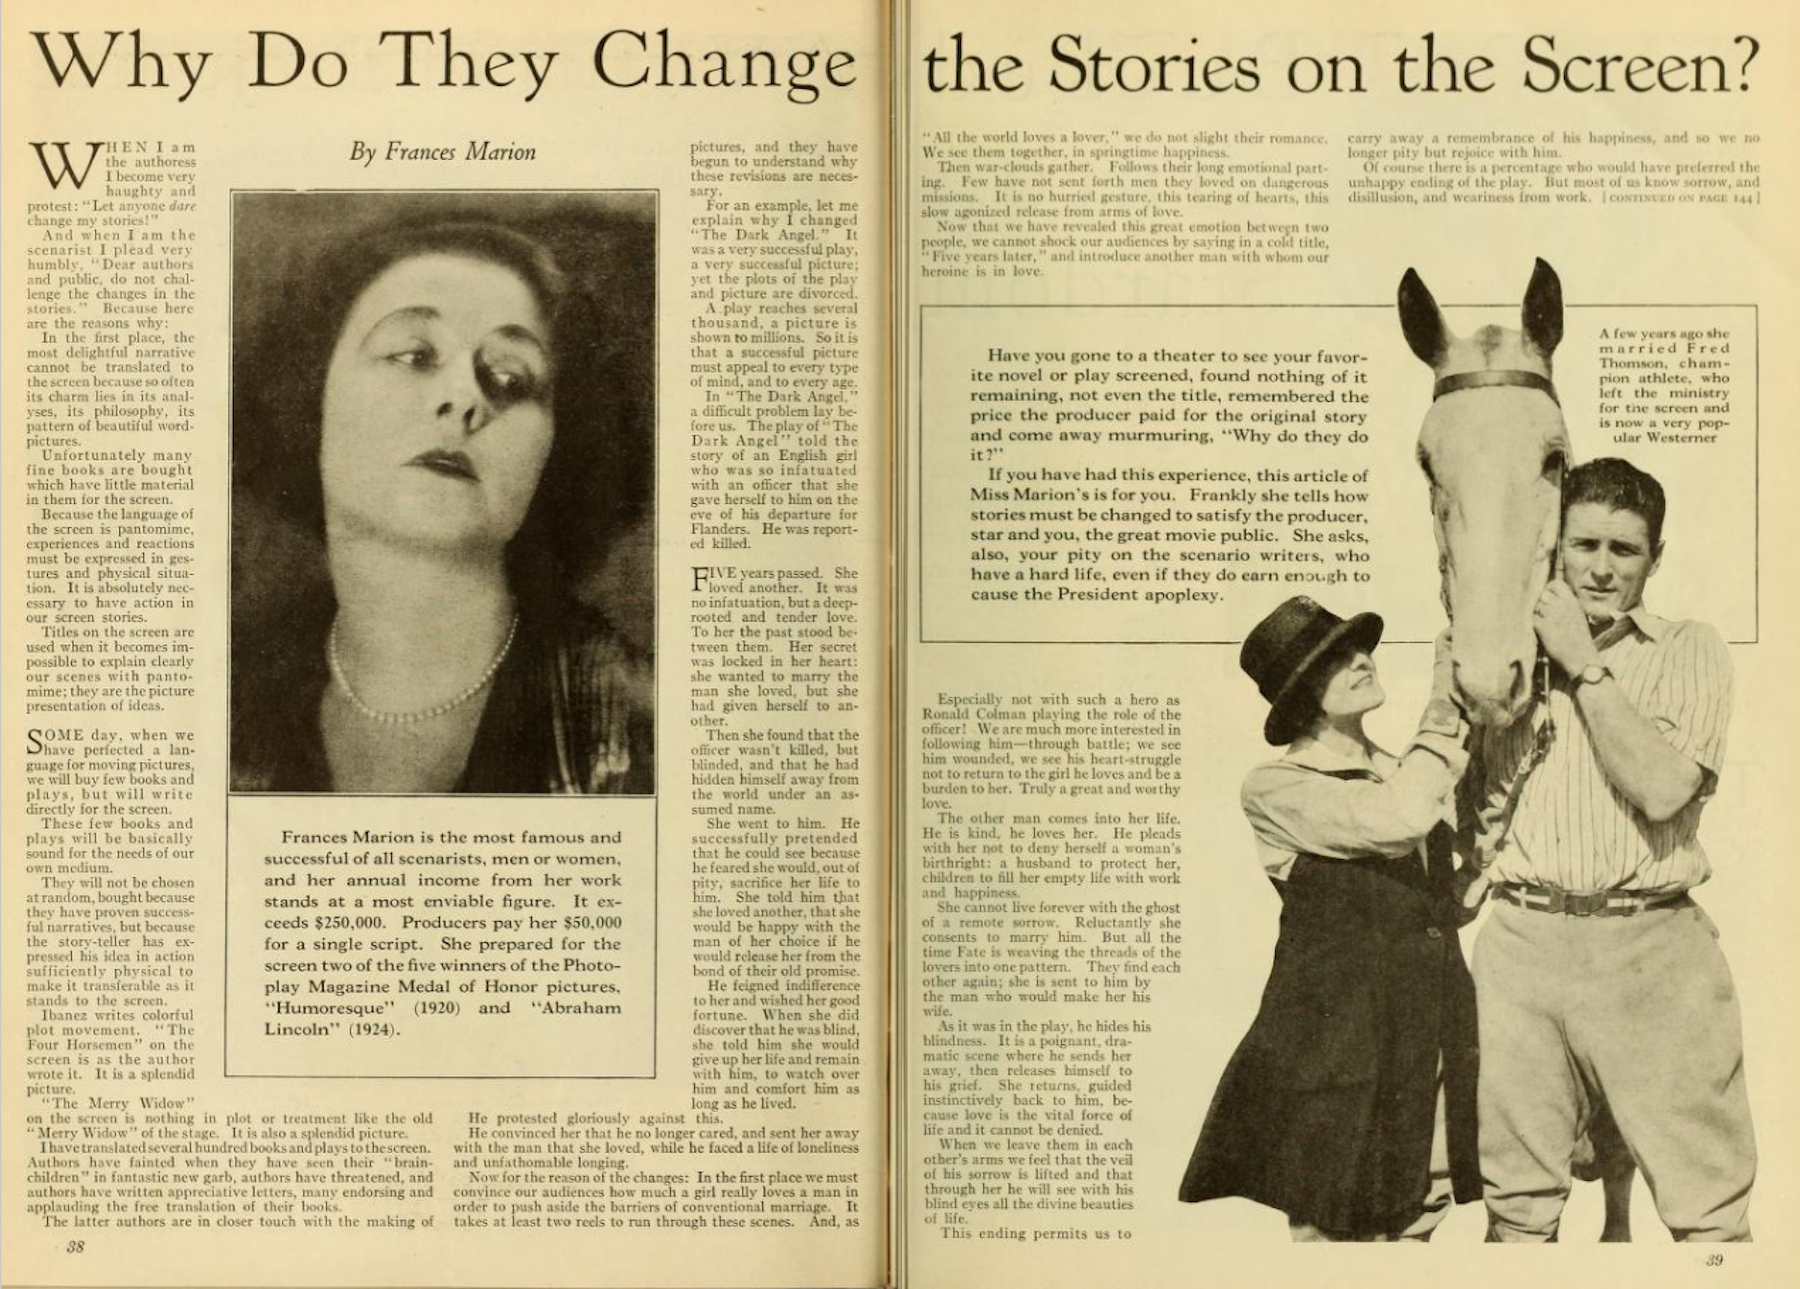 Shaping the Craft of Screenwriting Women Screen Writers in Silent Era Hollywood